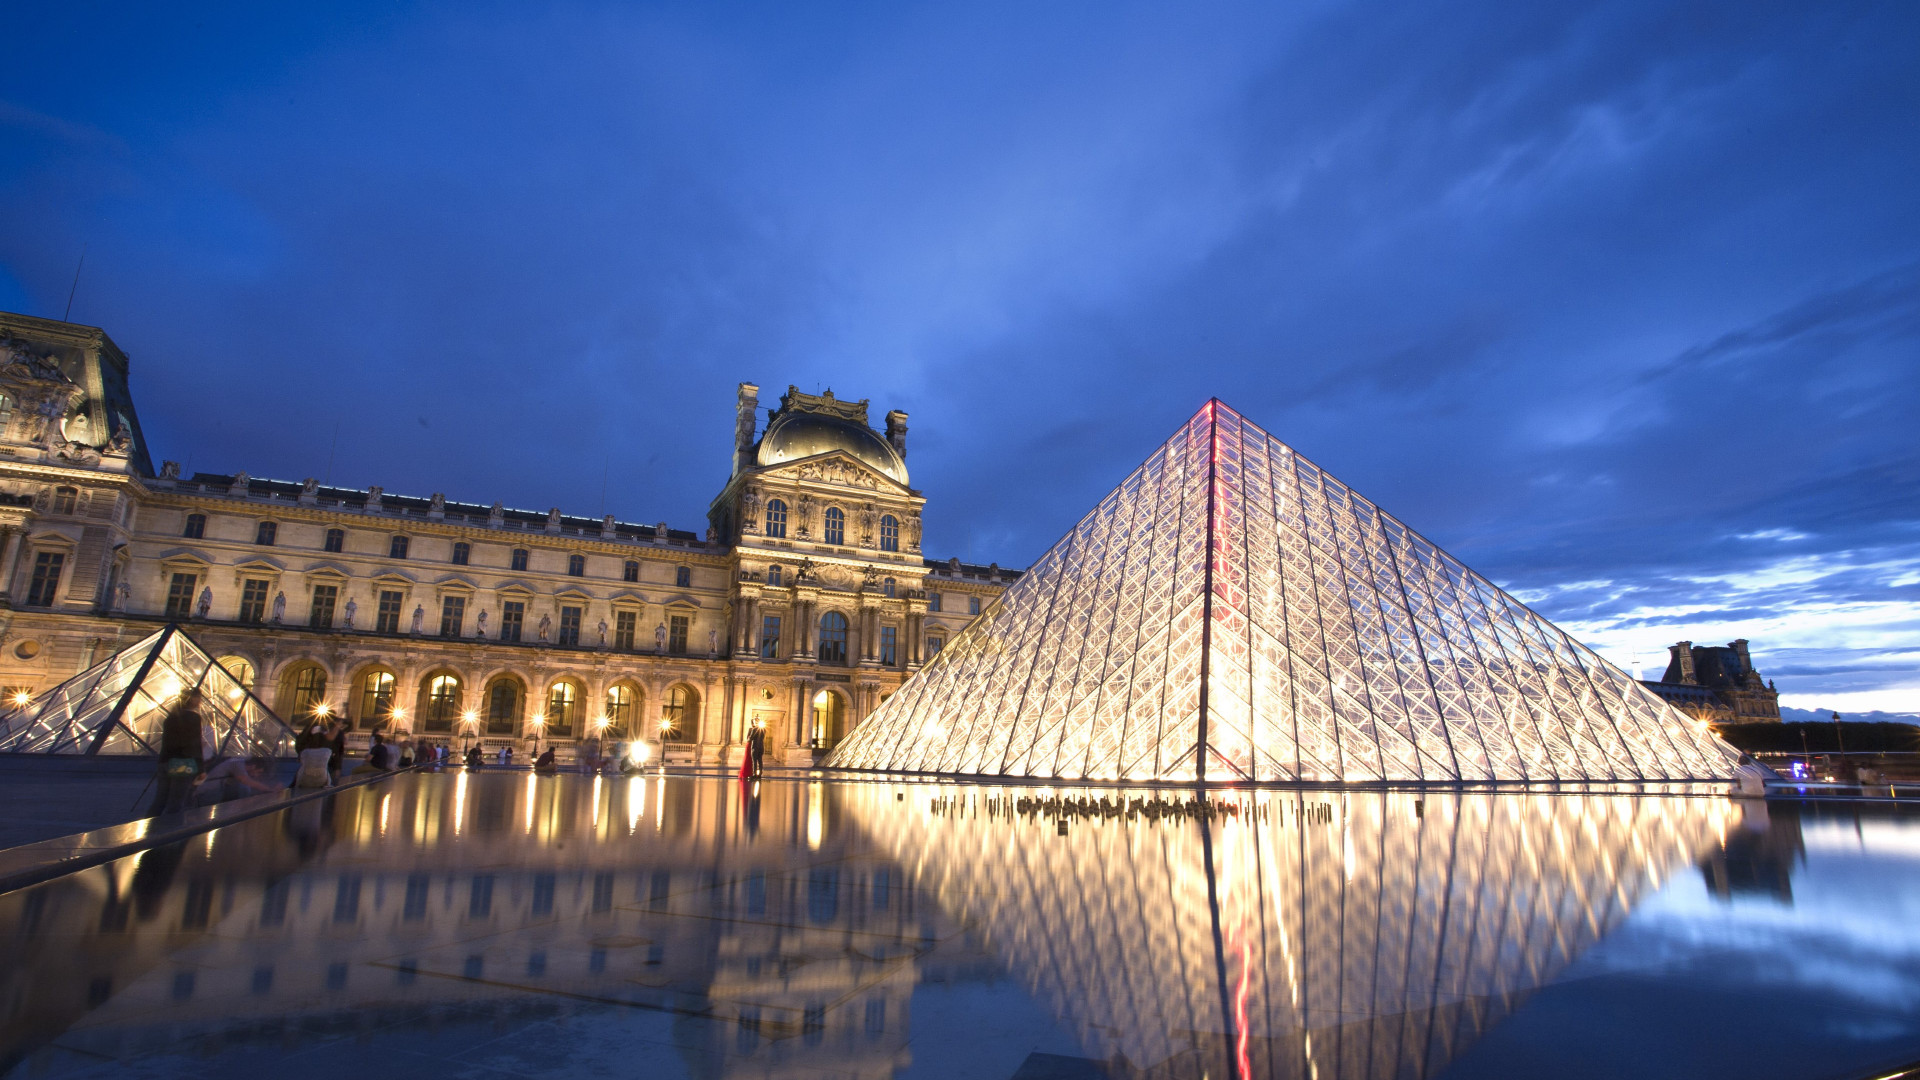 Louvre pyramid and museum wallpaper 1920x1080